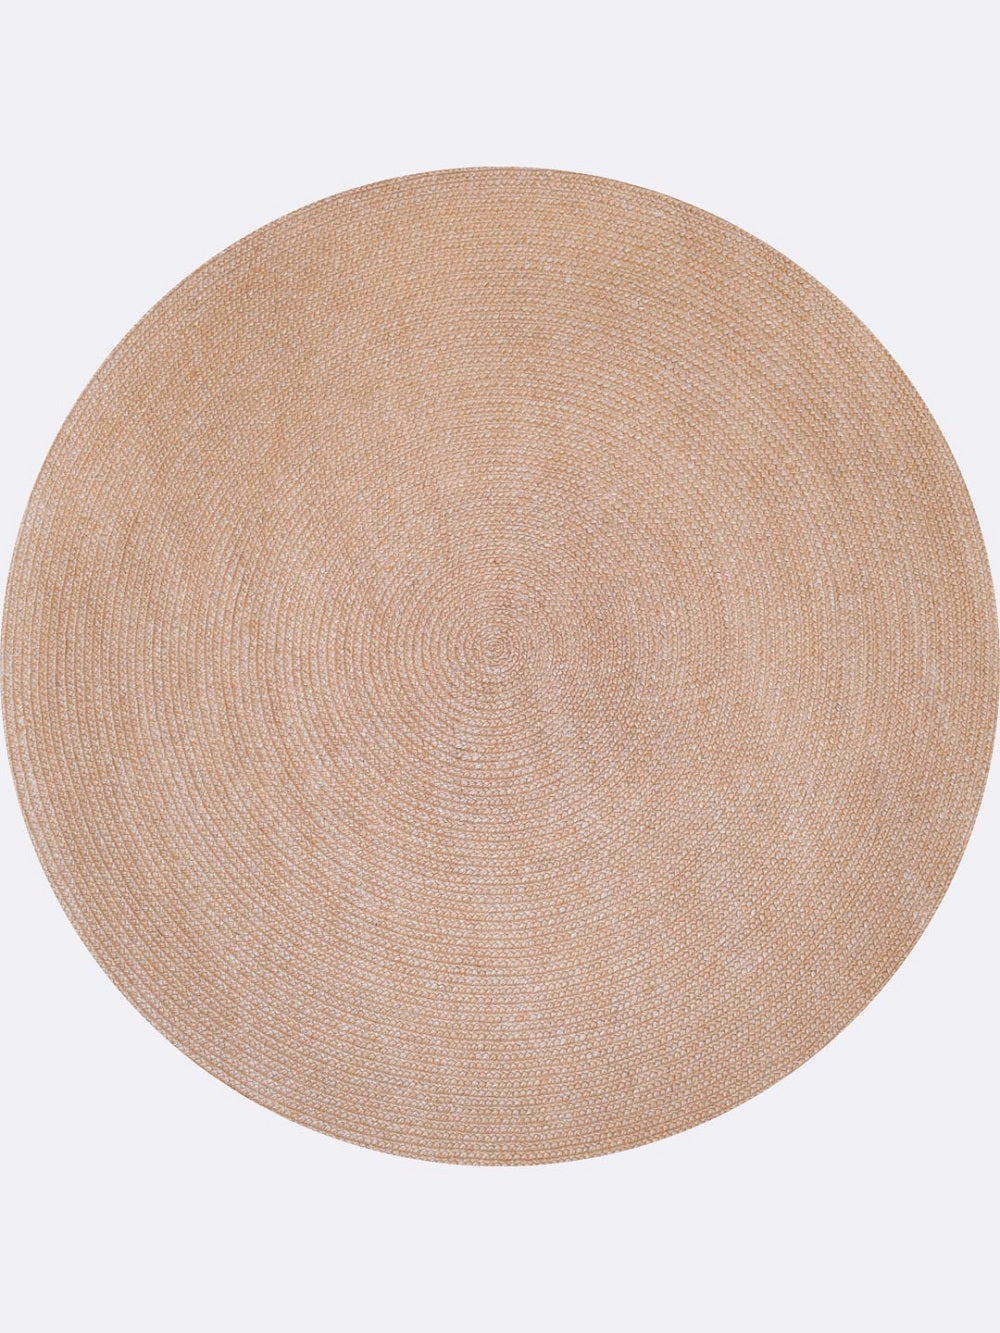 Paddington Clay Round Rug 20% off from the Rug Collection Stockist Make Your House A Home, Furniture Store Bendigo. Free Australia Wide Delivery